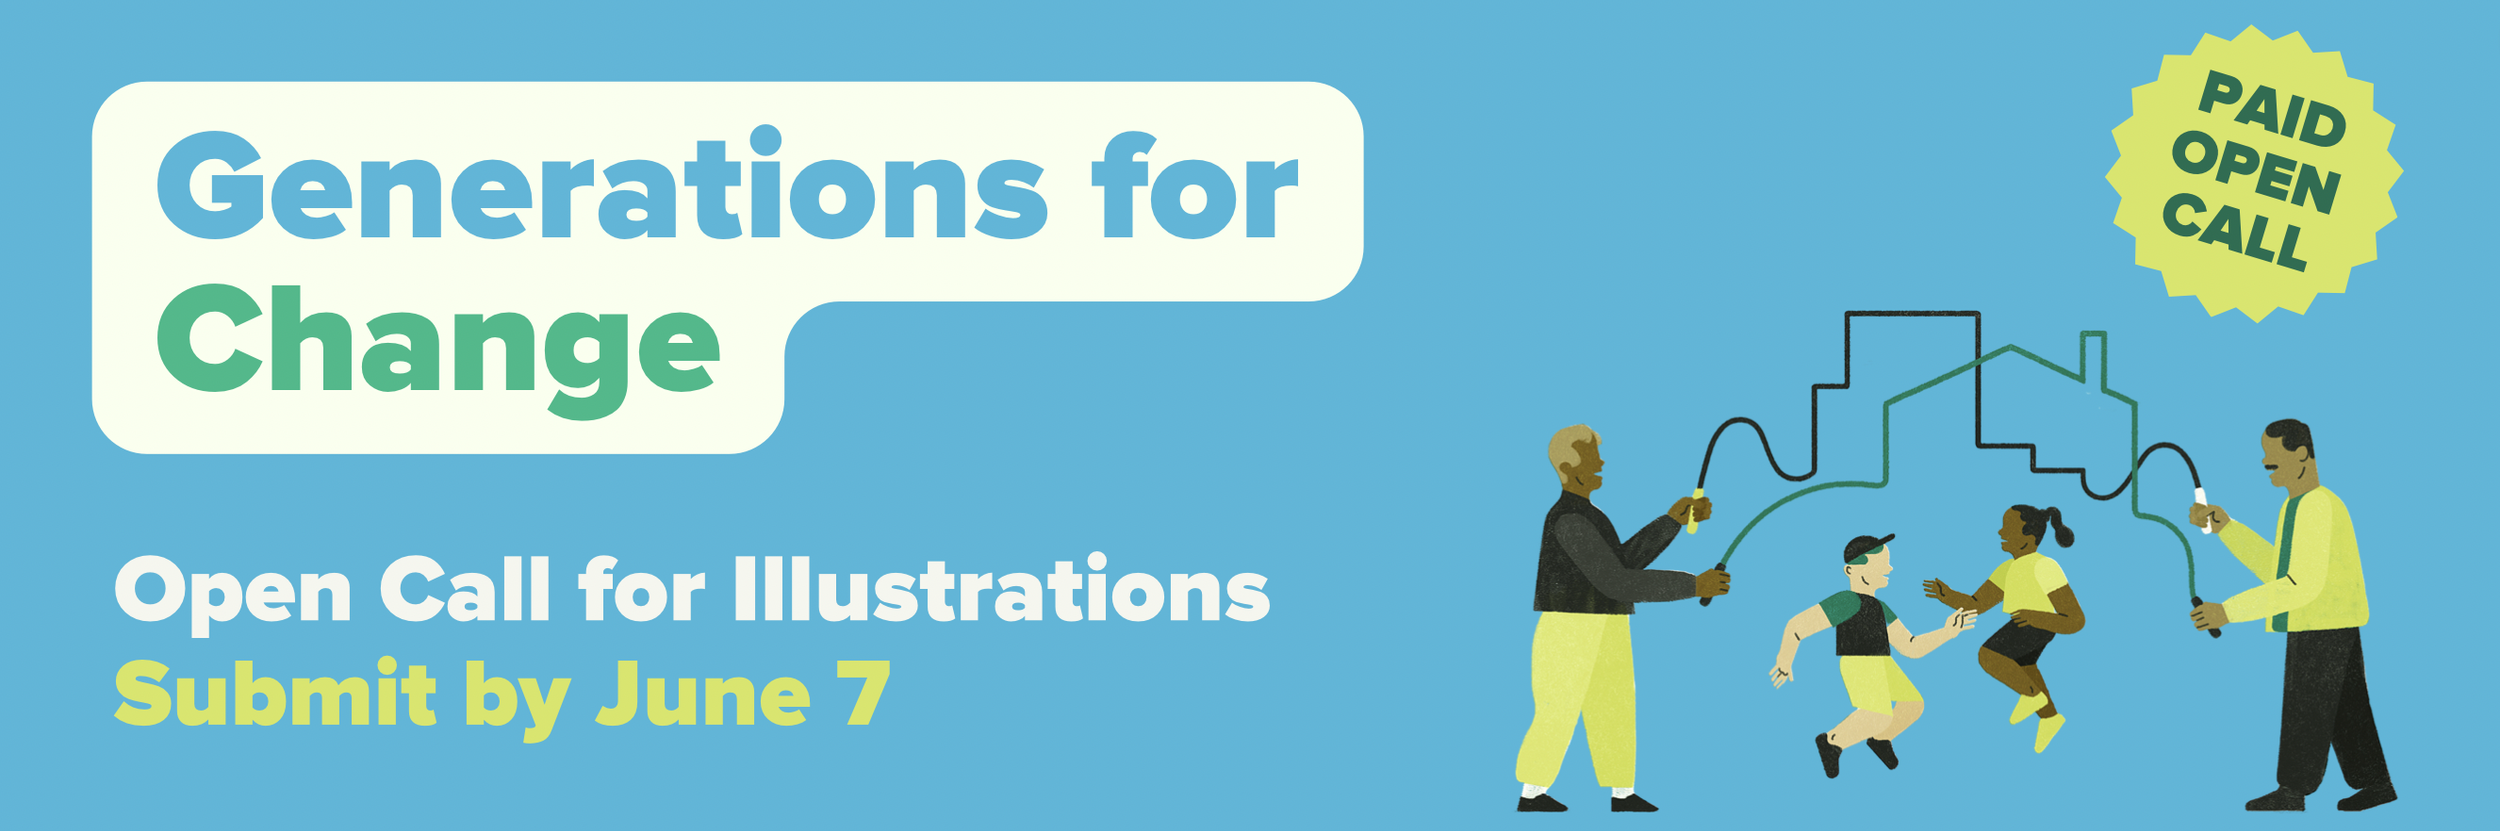 Generations for Change: Open Call for Illustrations. Submit by June 7